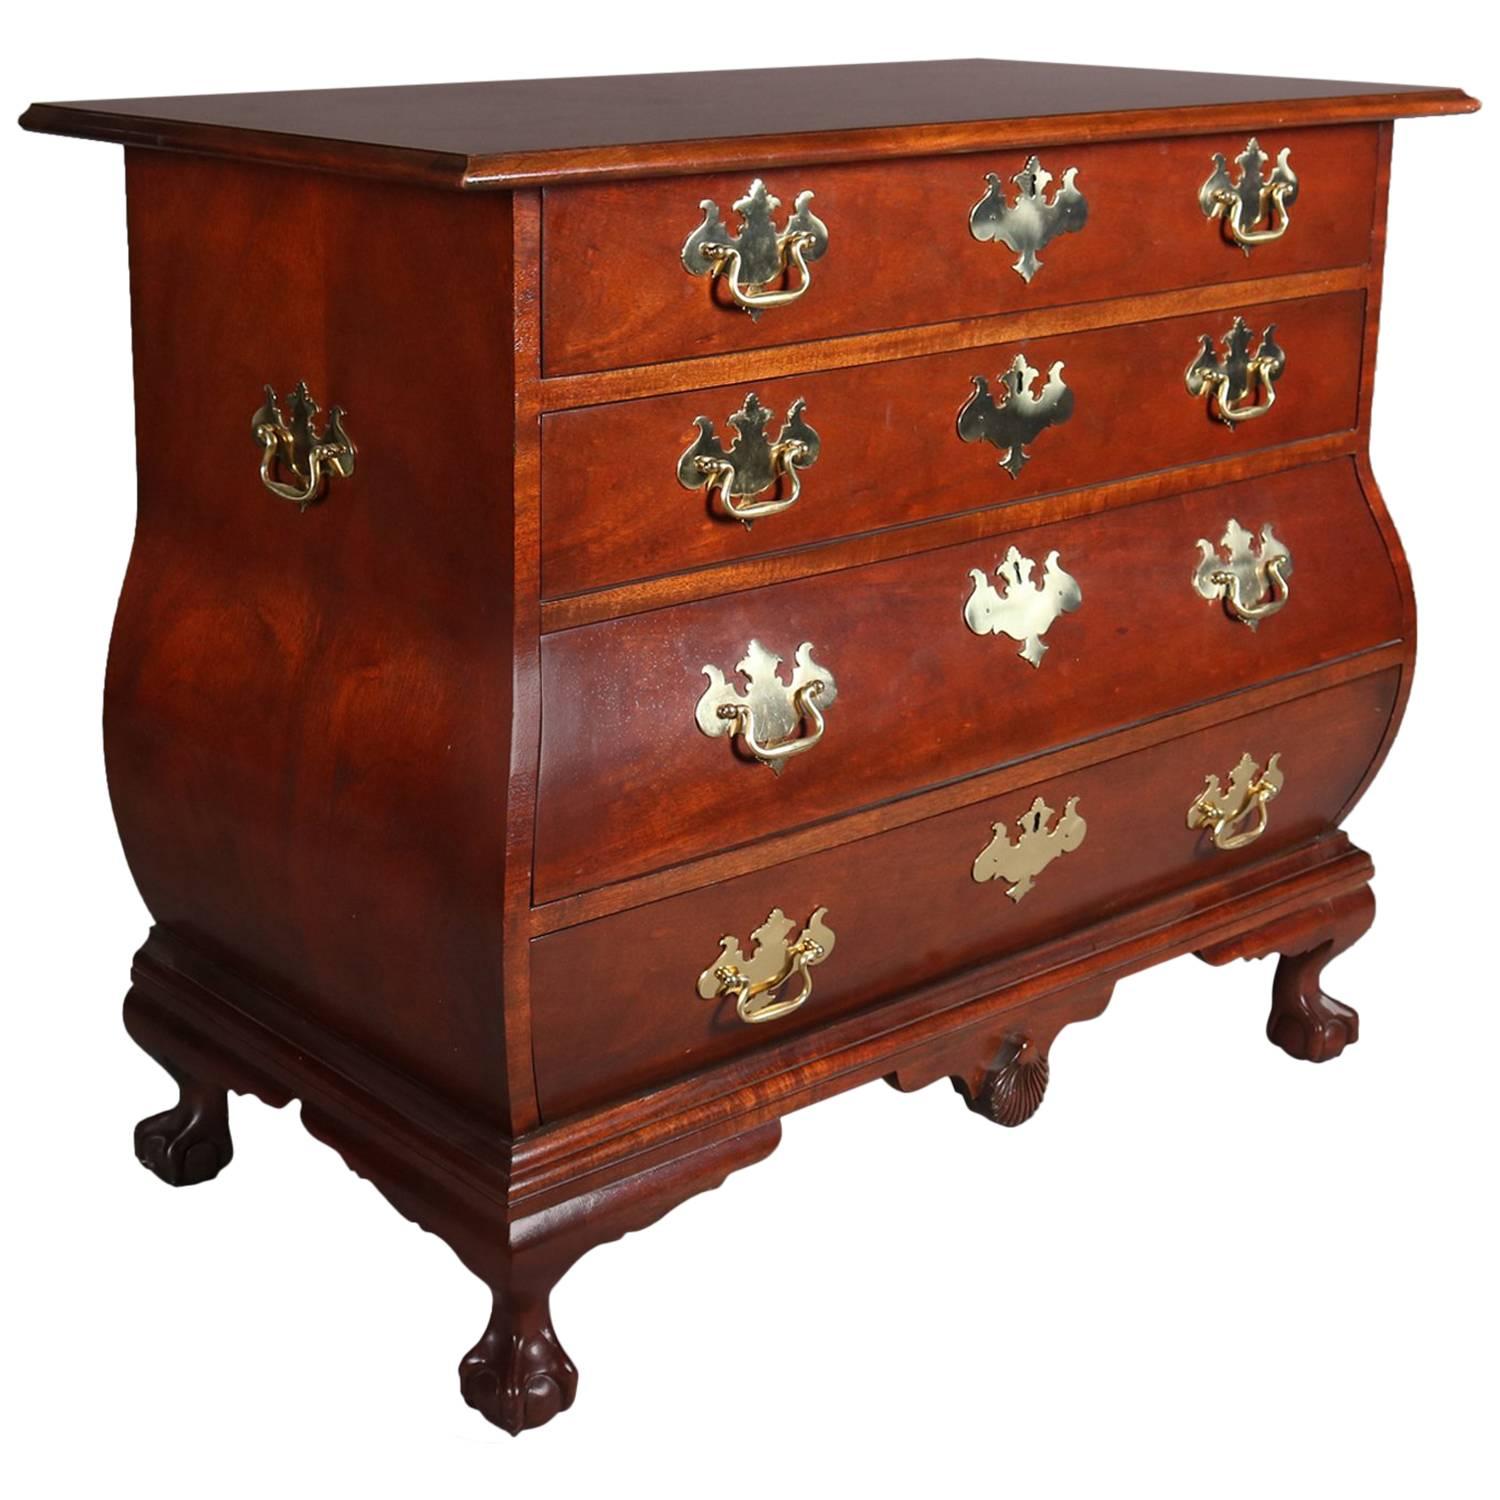 Baker Furniture Historic Charleston Chippendale Mahogany Ball & Claw Bombe Chest